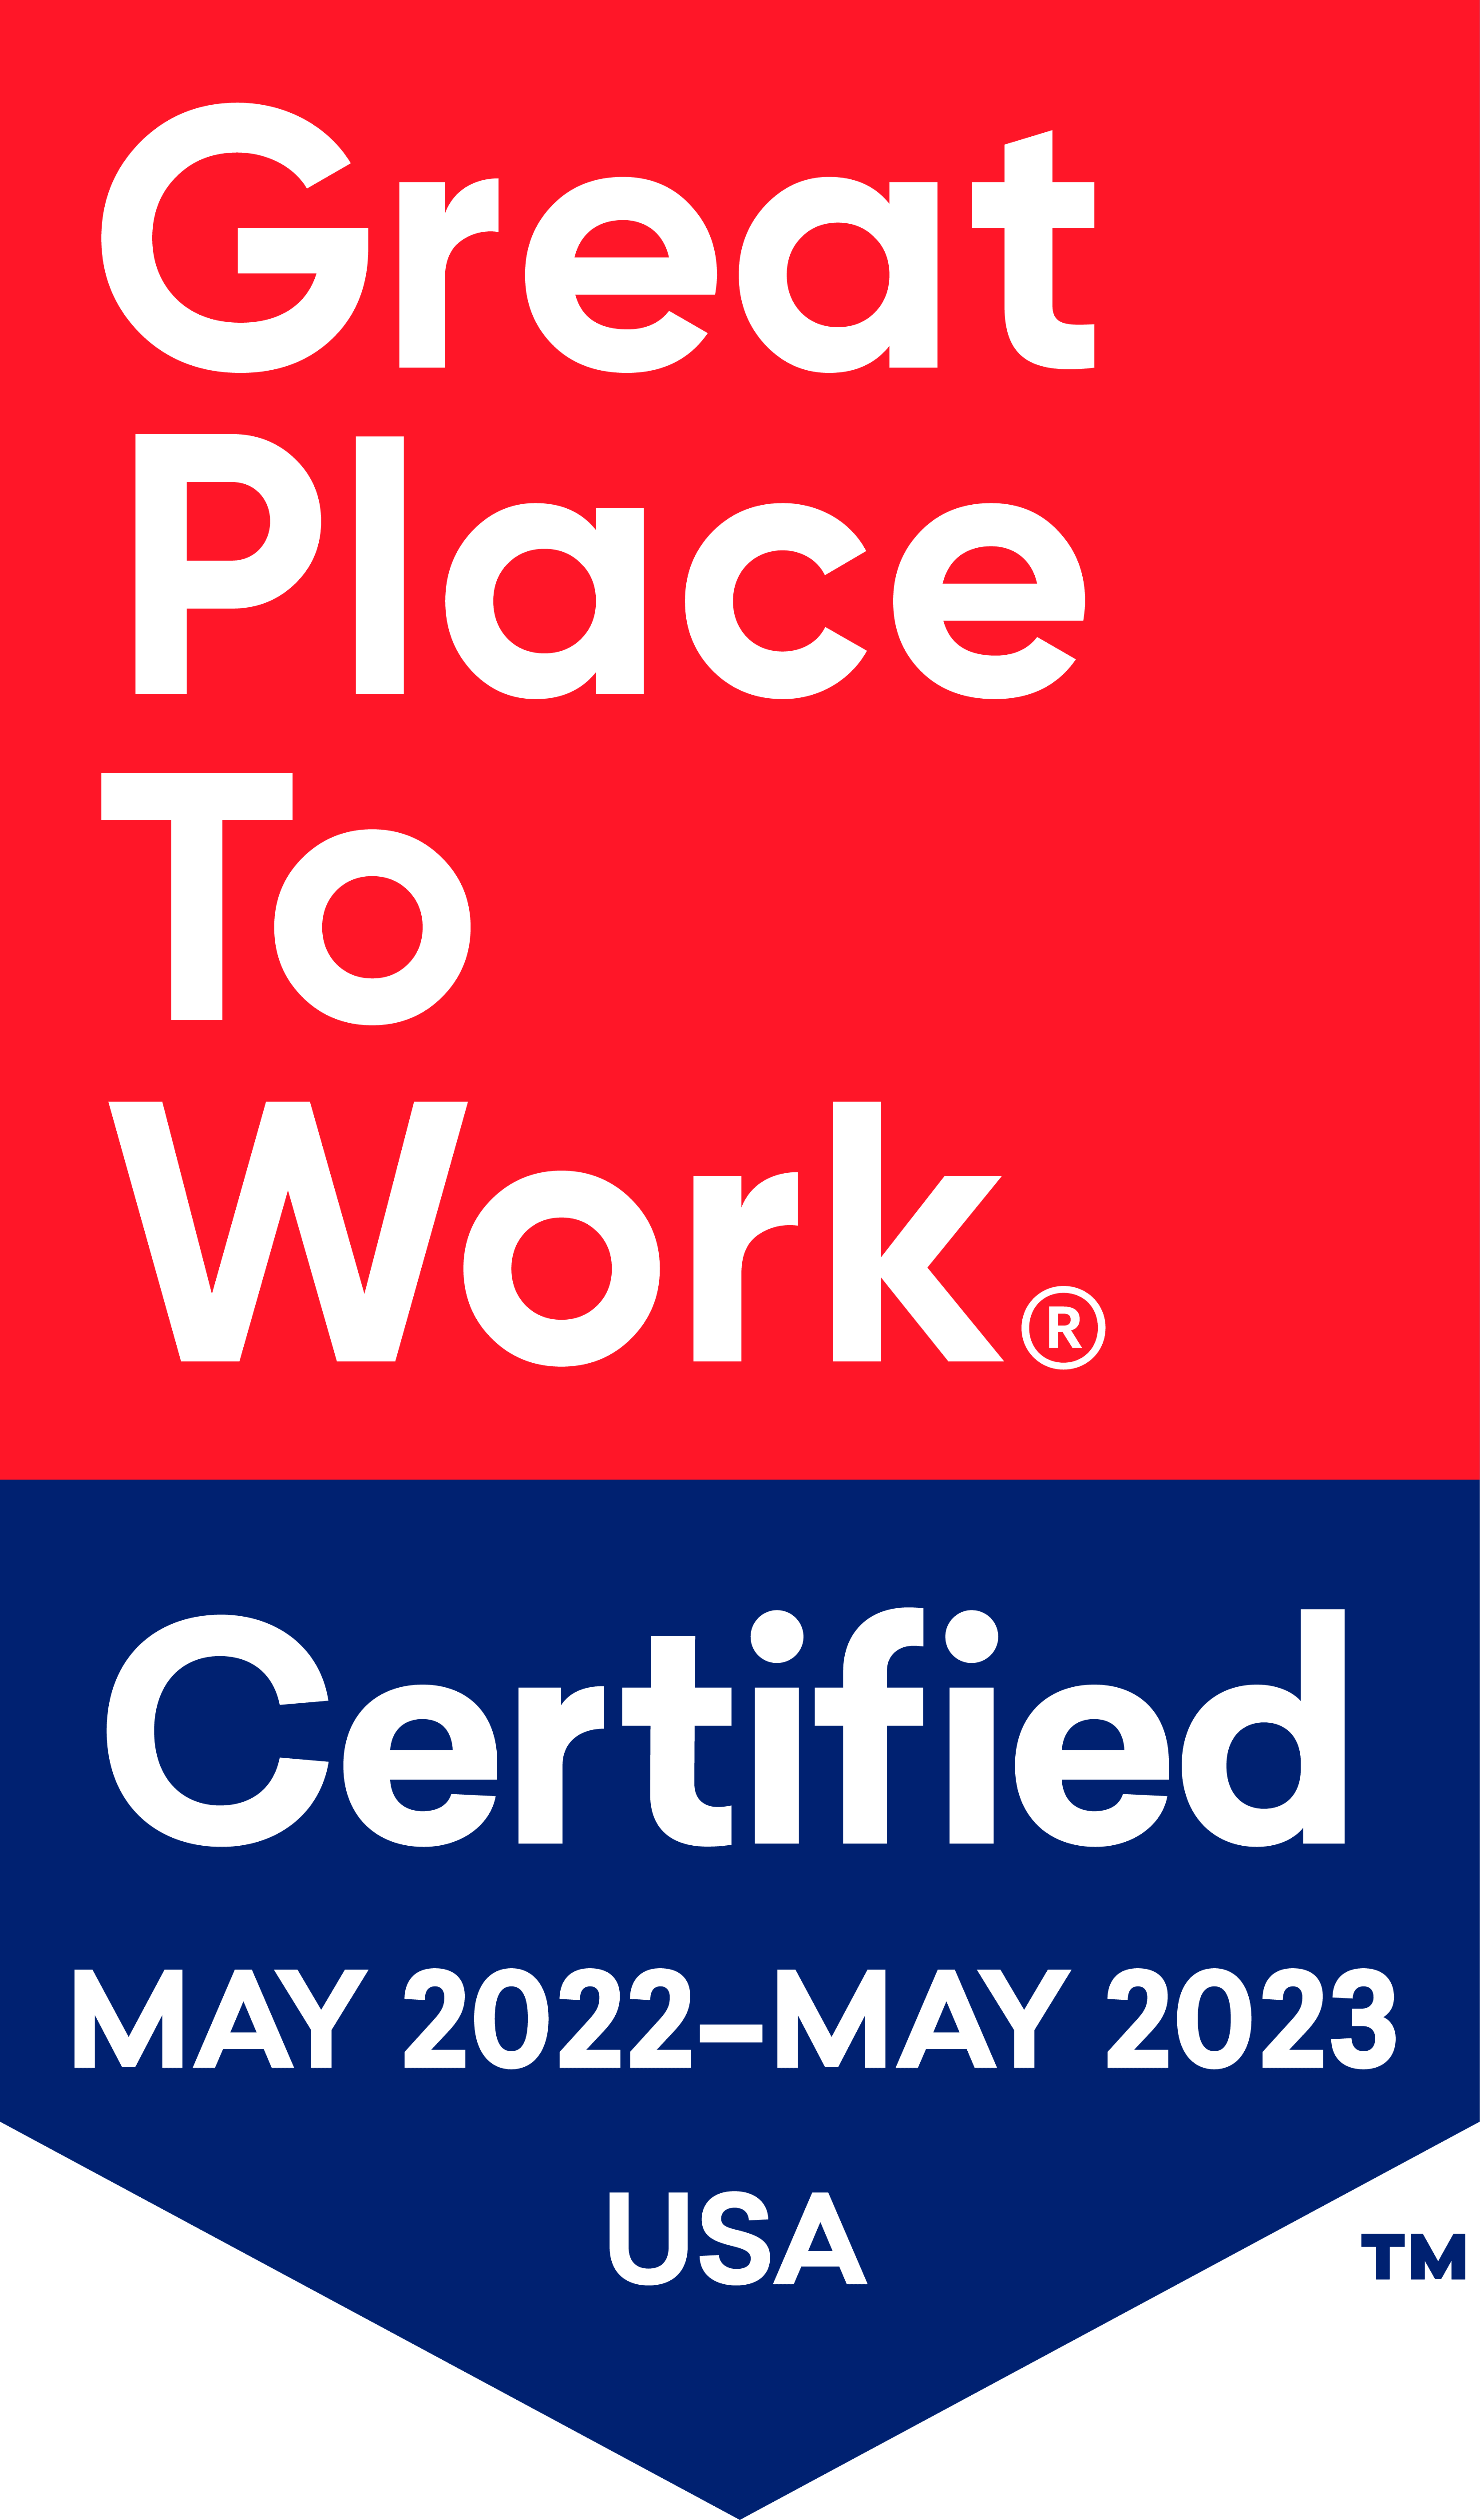 Island House is Great Place To Work Certified